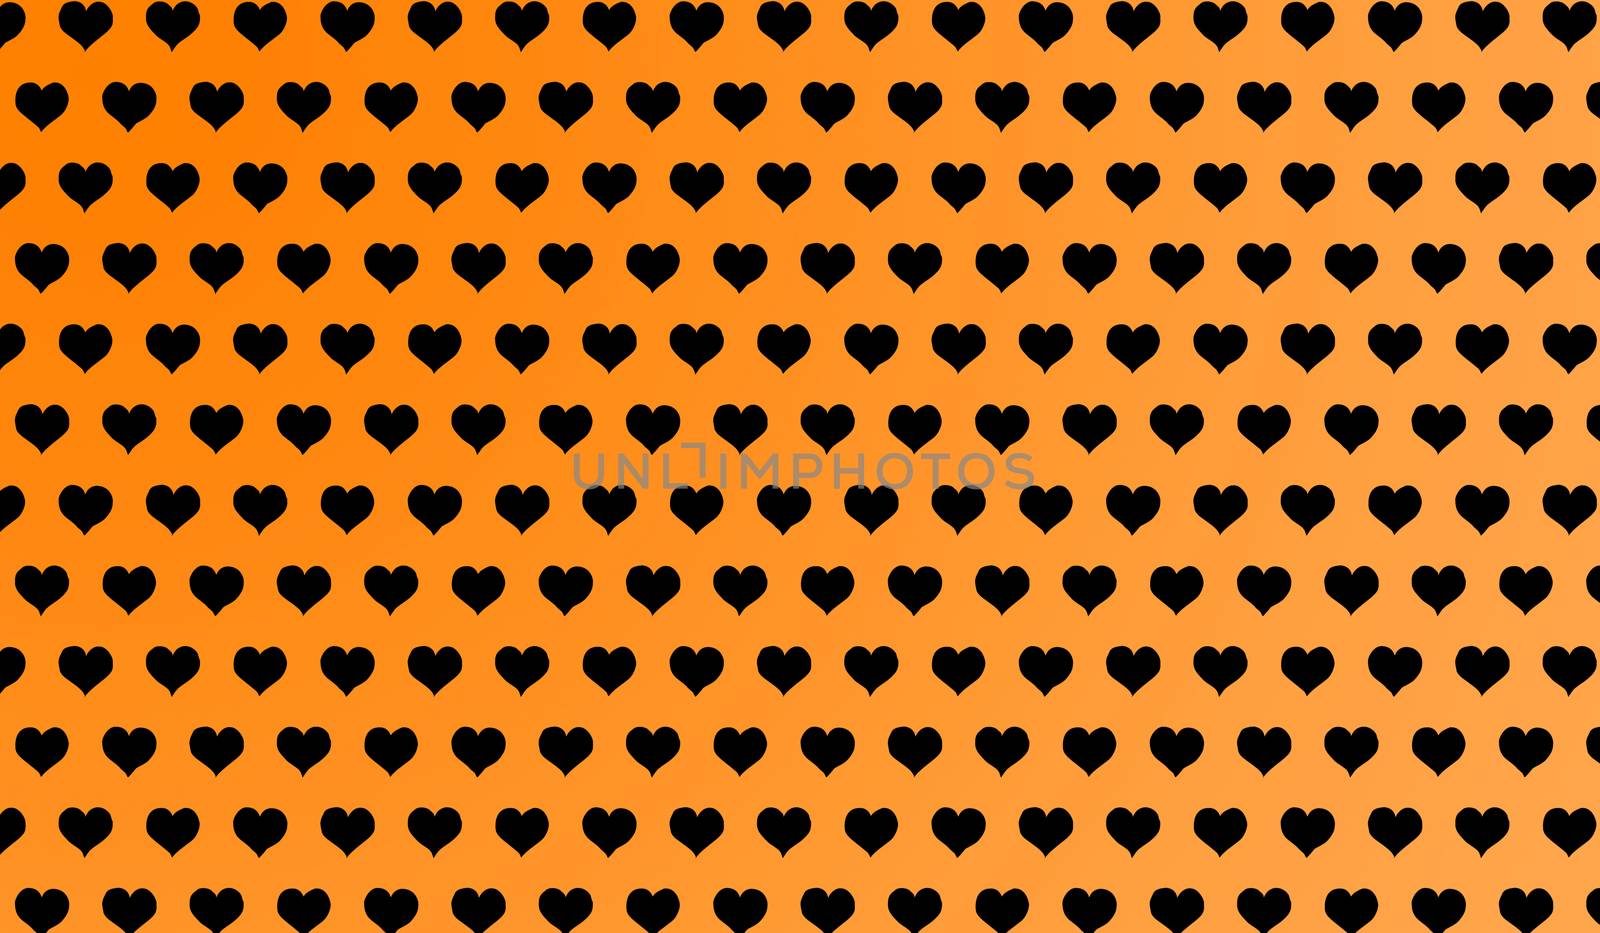 2d orange pattern of cartoon hearts on isolated background by Andreajk3